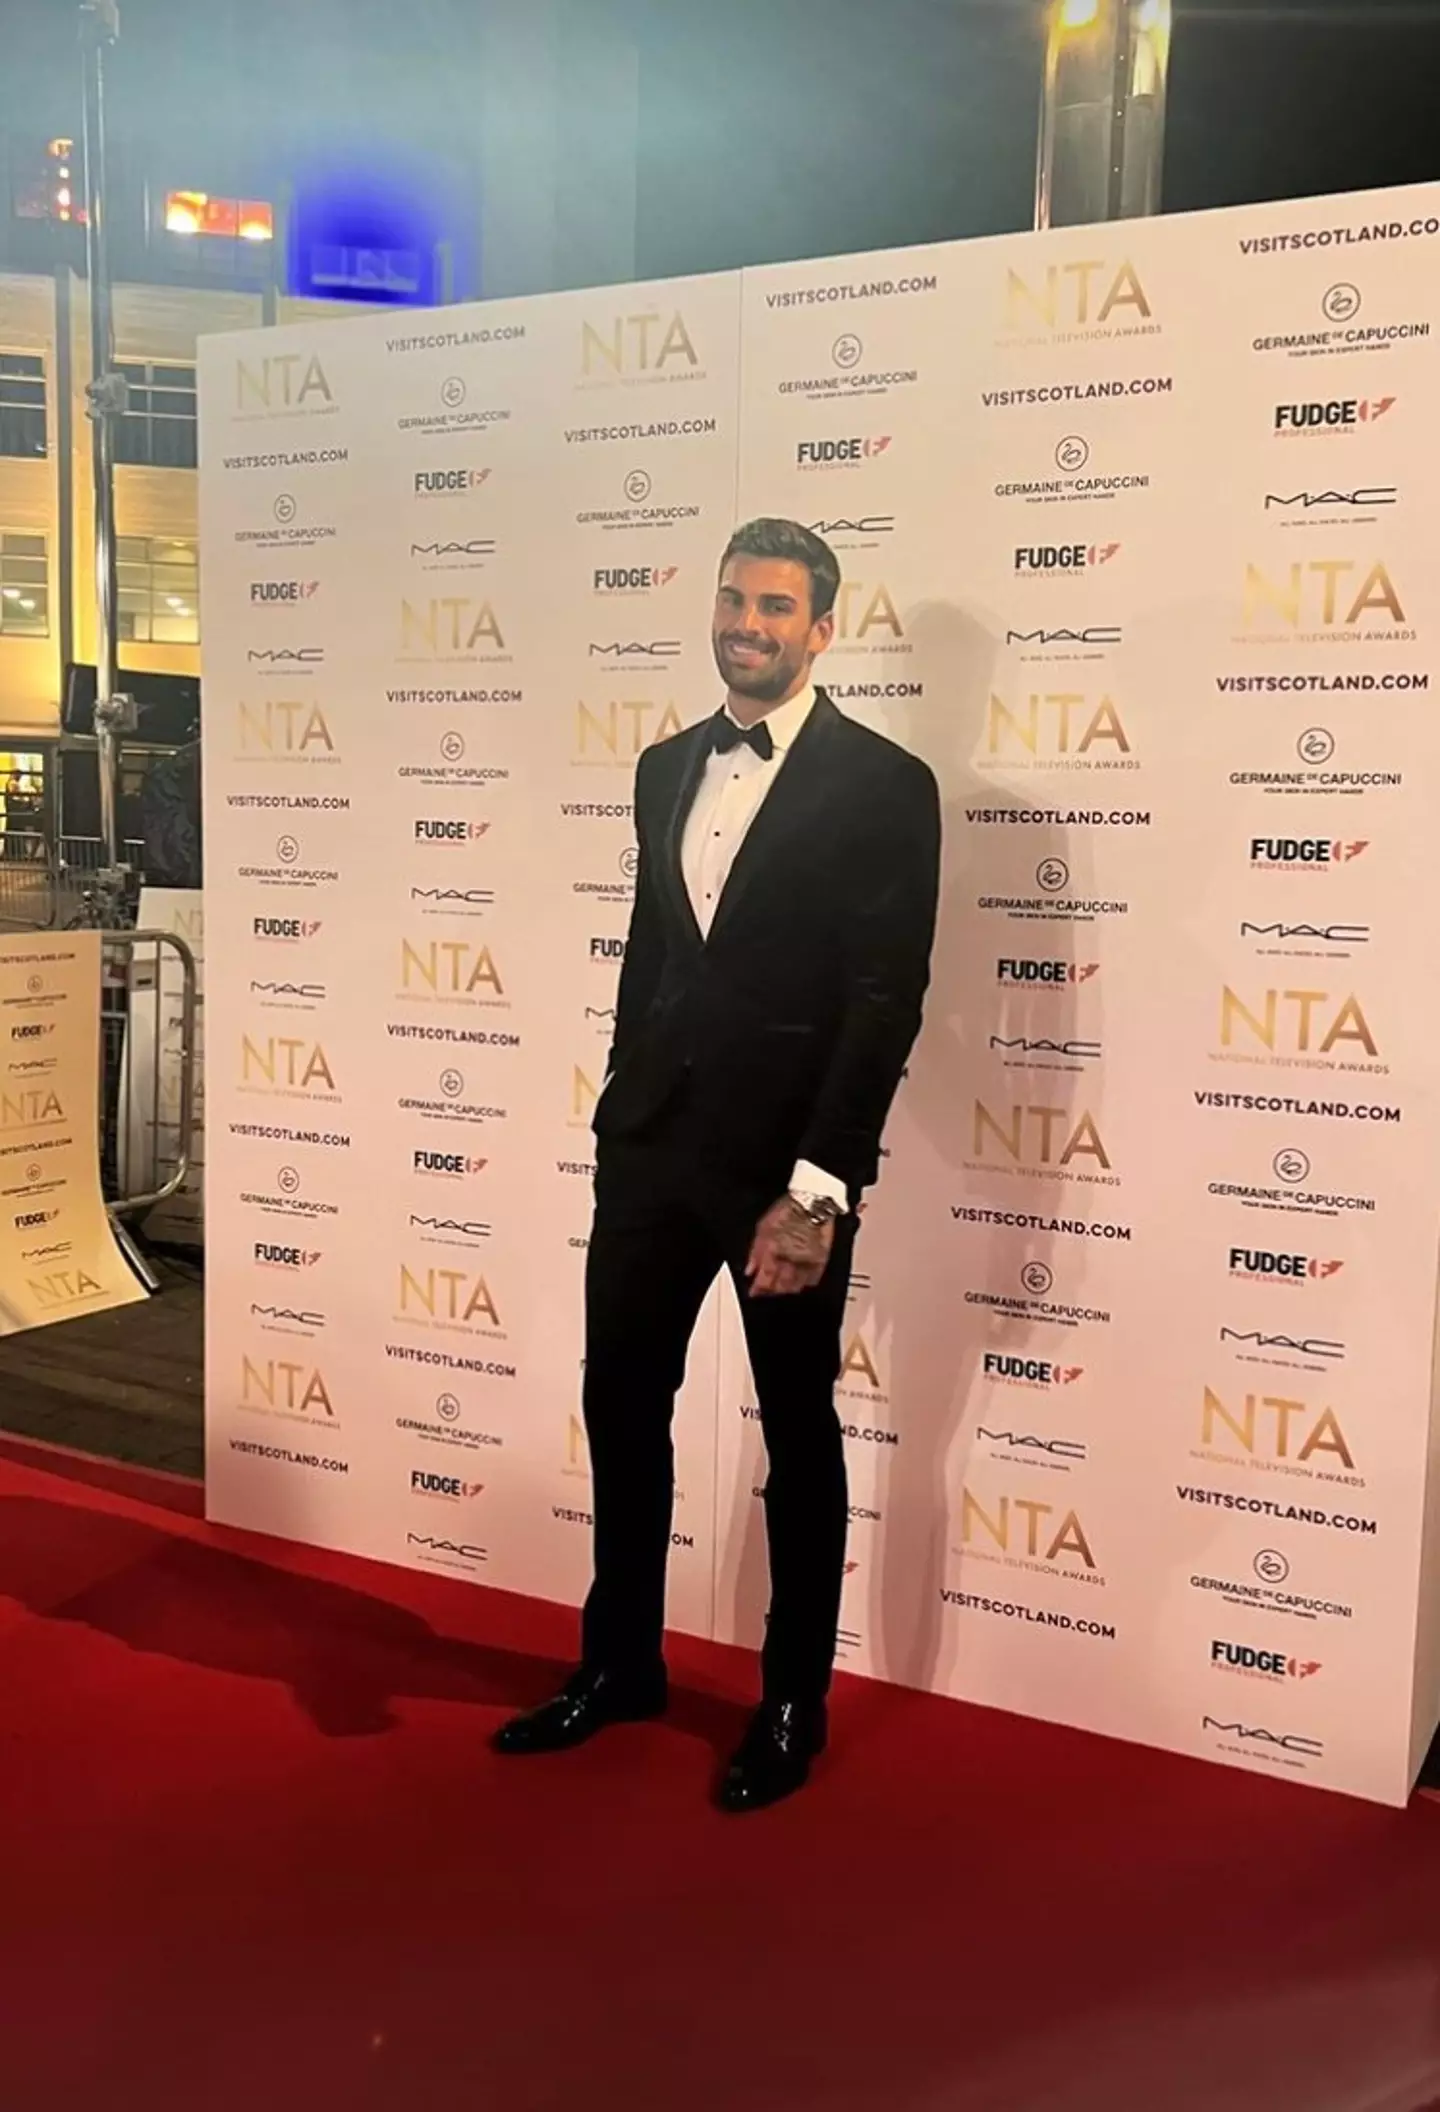 Adam has opened up about their split tonight at the NTAs.